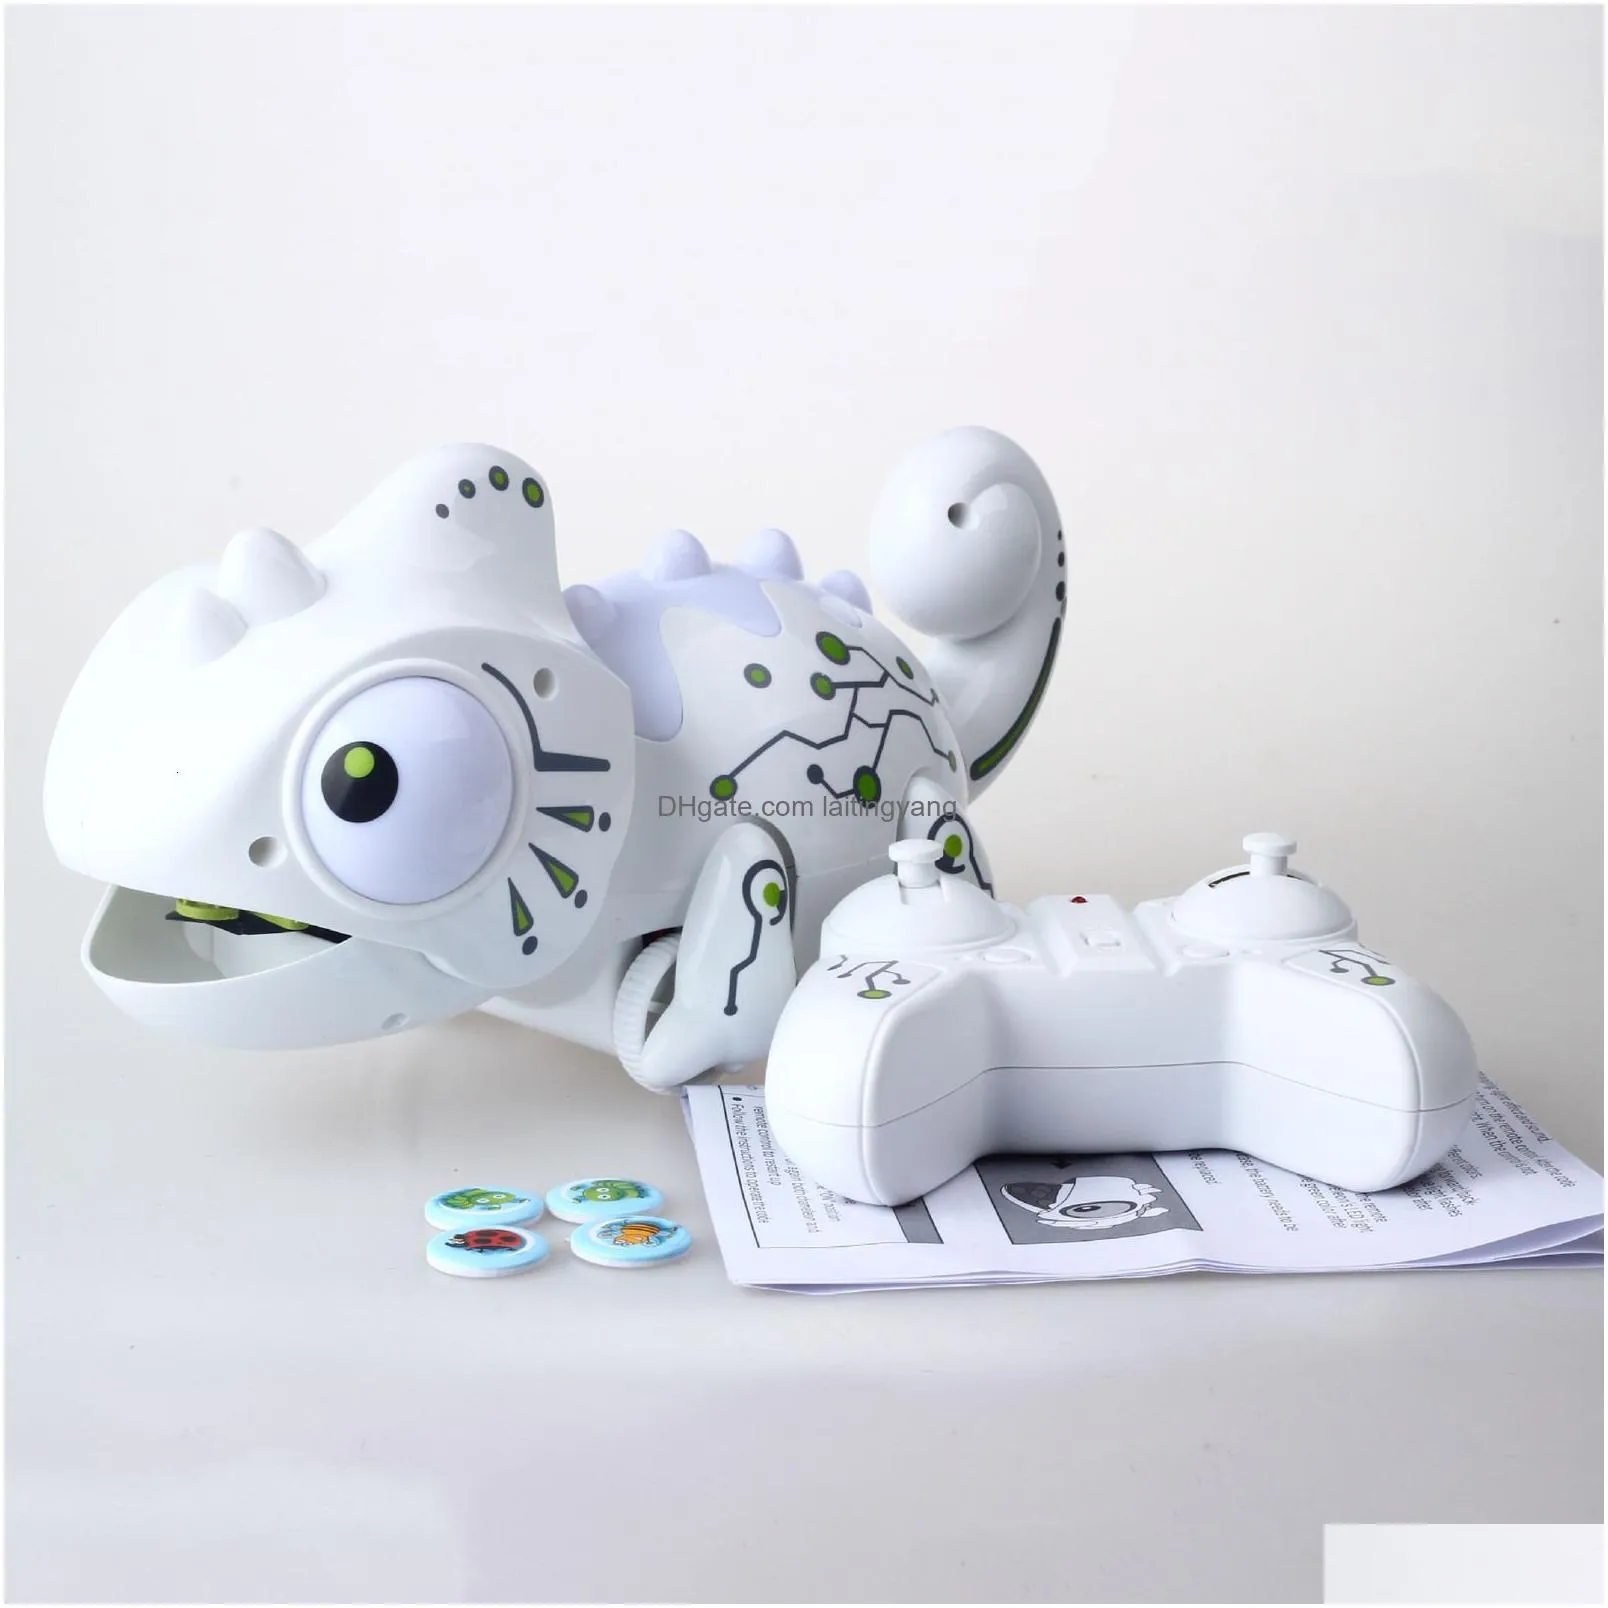 electric/rc animals rc chameleon lizard pet 2.4 g intelligent toy robot for children kids birthday gift funny toys remote control reptile